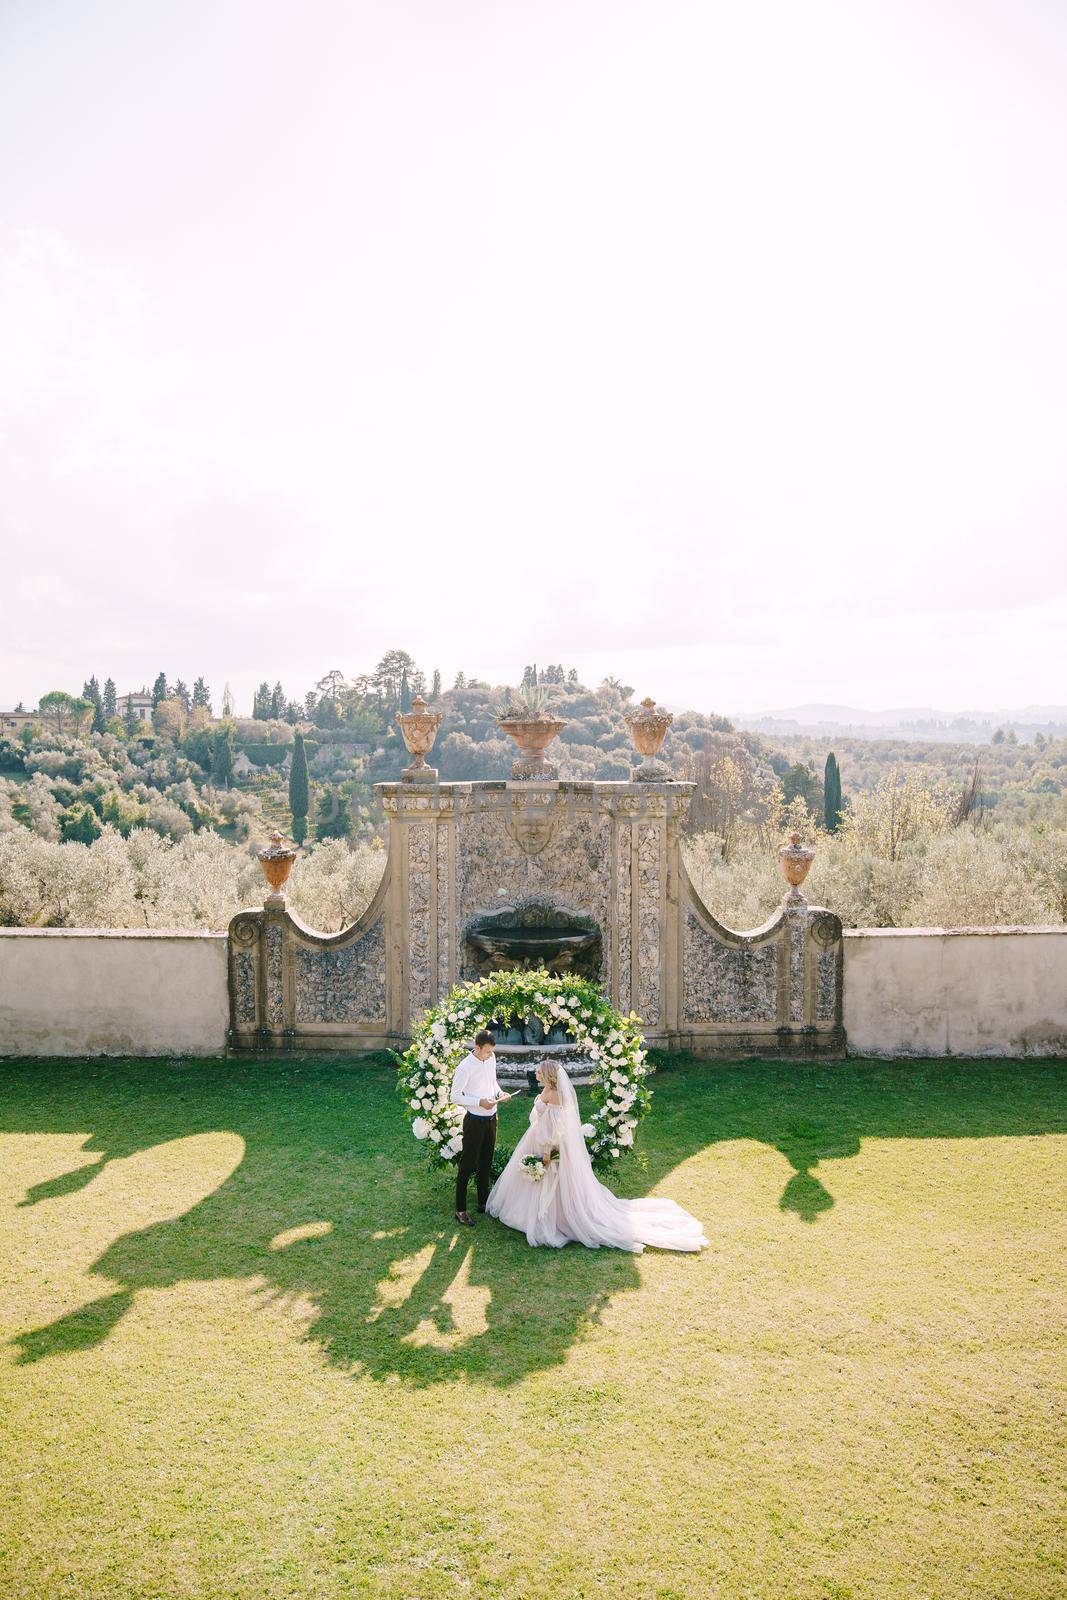 Florence, Italy - 01 october 2019: Wedding at an old winery villa in Tuscany, Italy. Wedding couple under a round arch of flowers. The groom reads wedding vows. by Nadtochiy